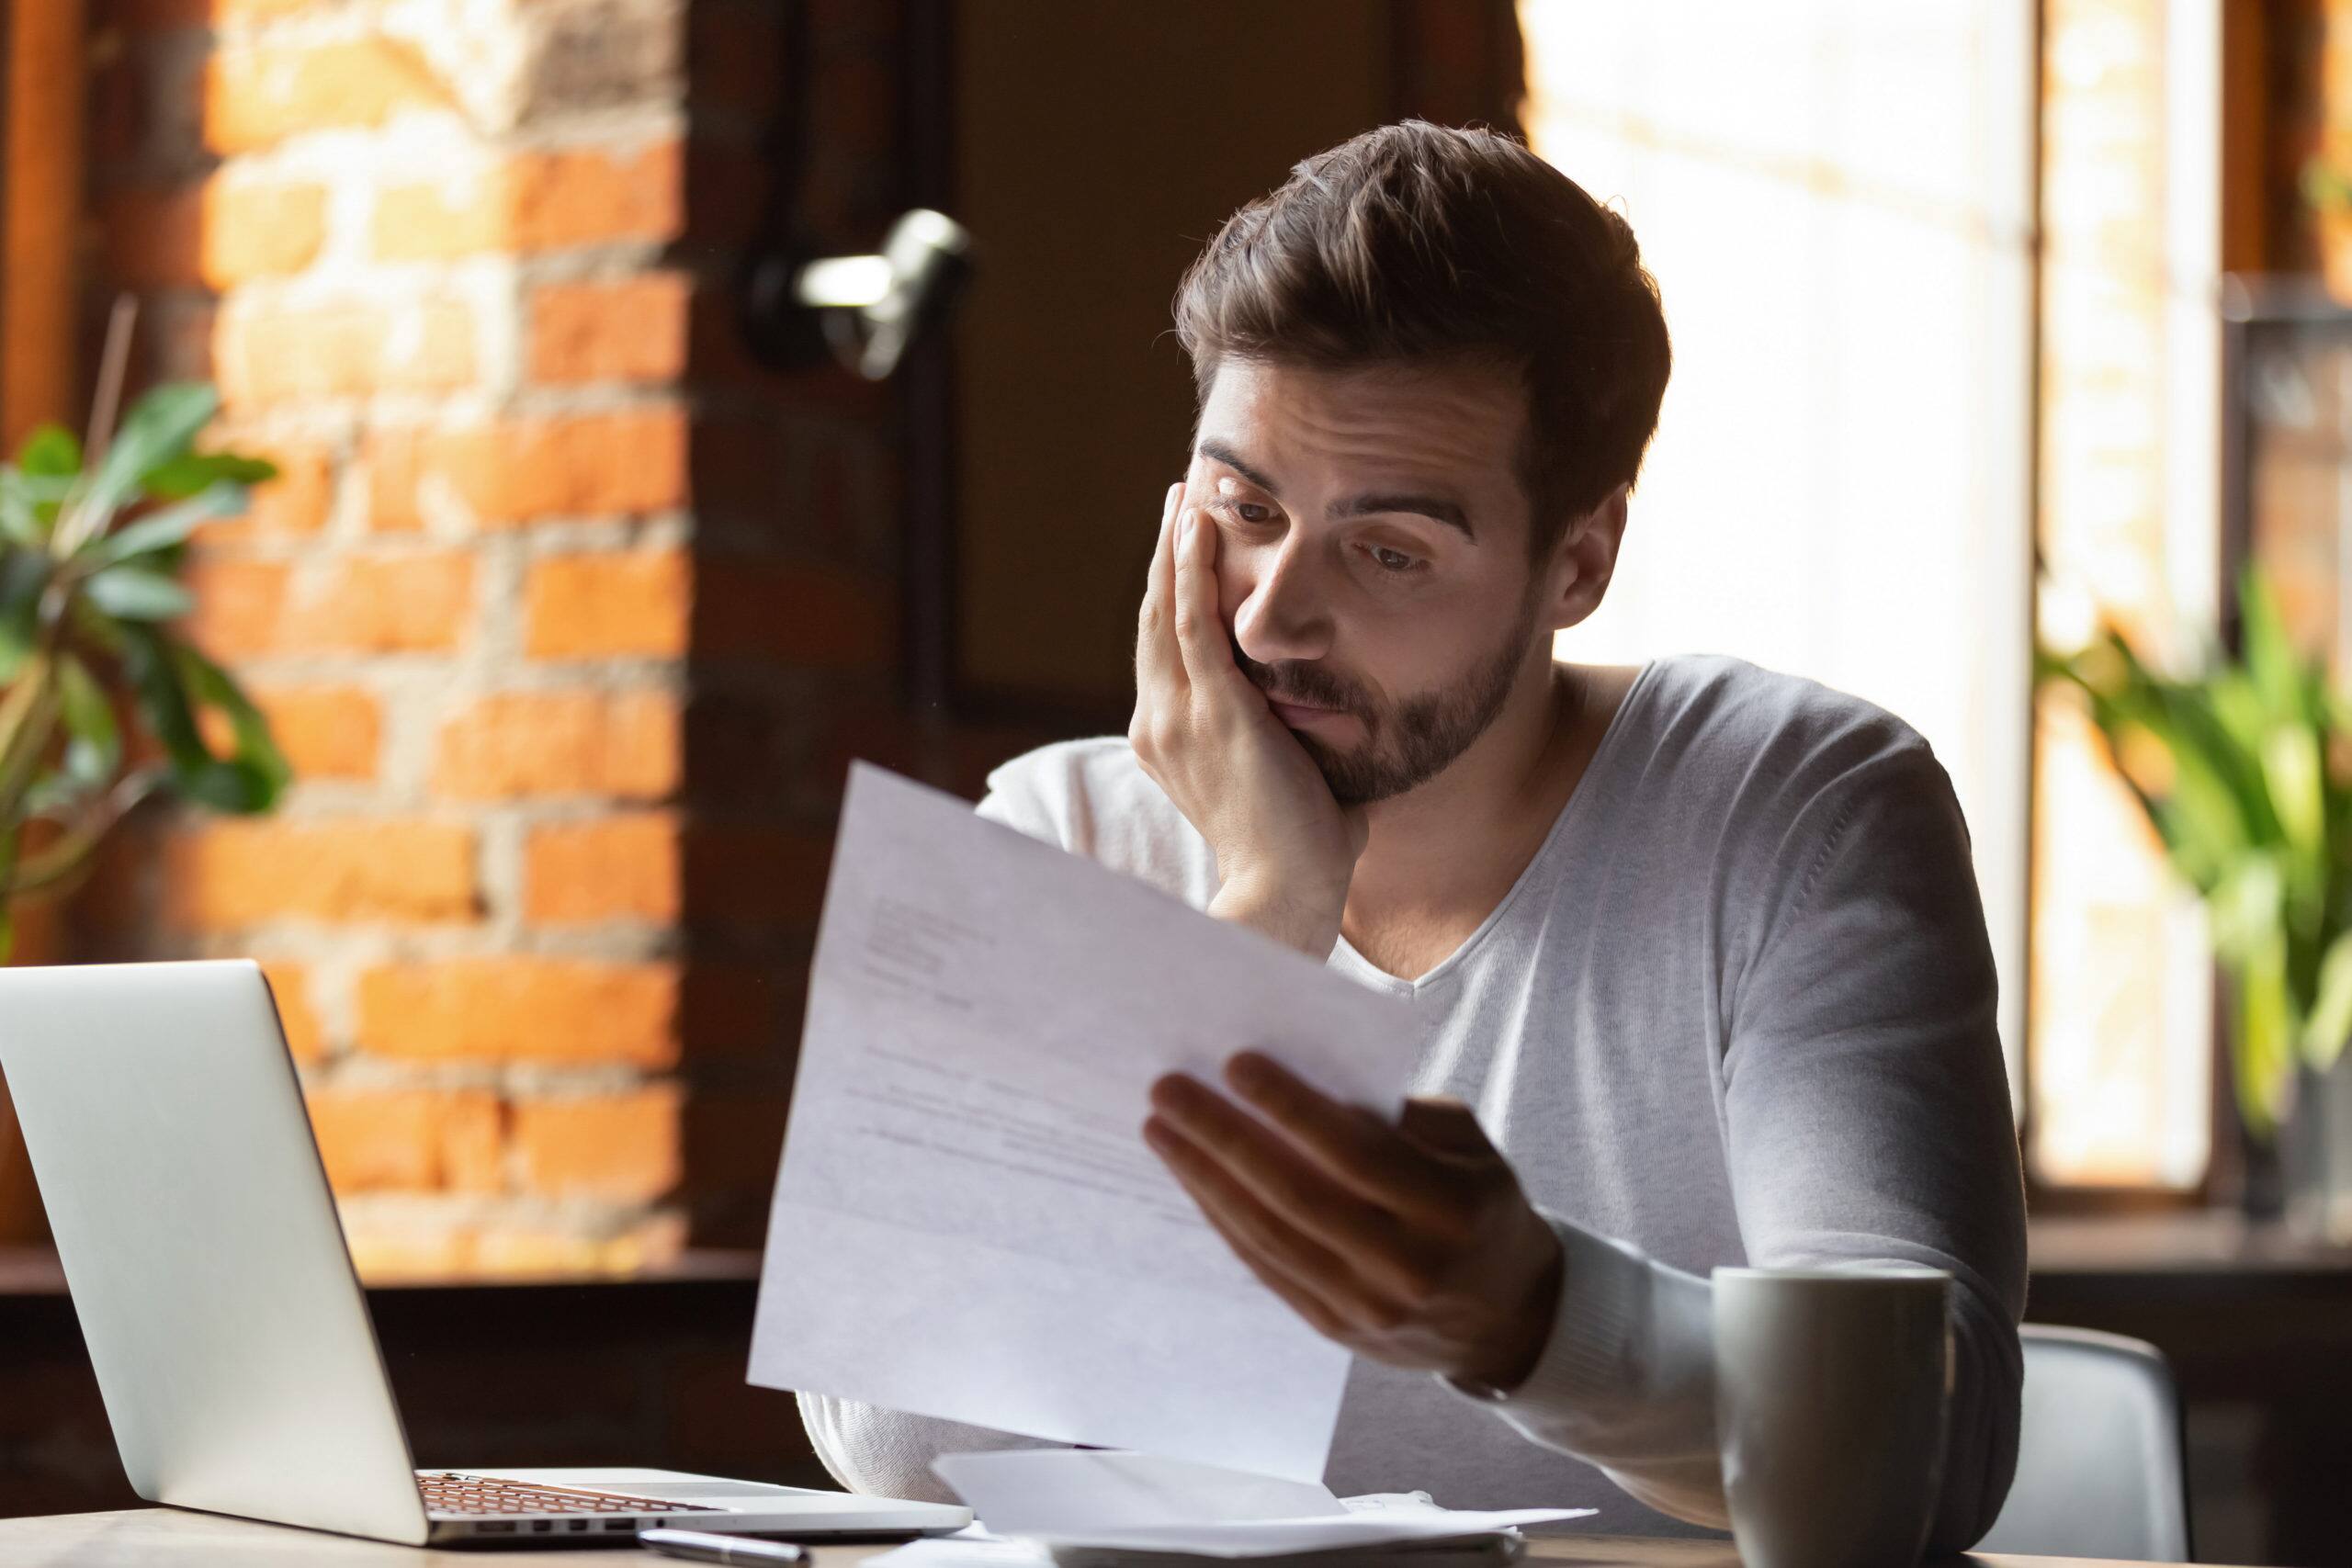 Confused frustrated young man reading CD taxes and interest in cafe